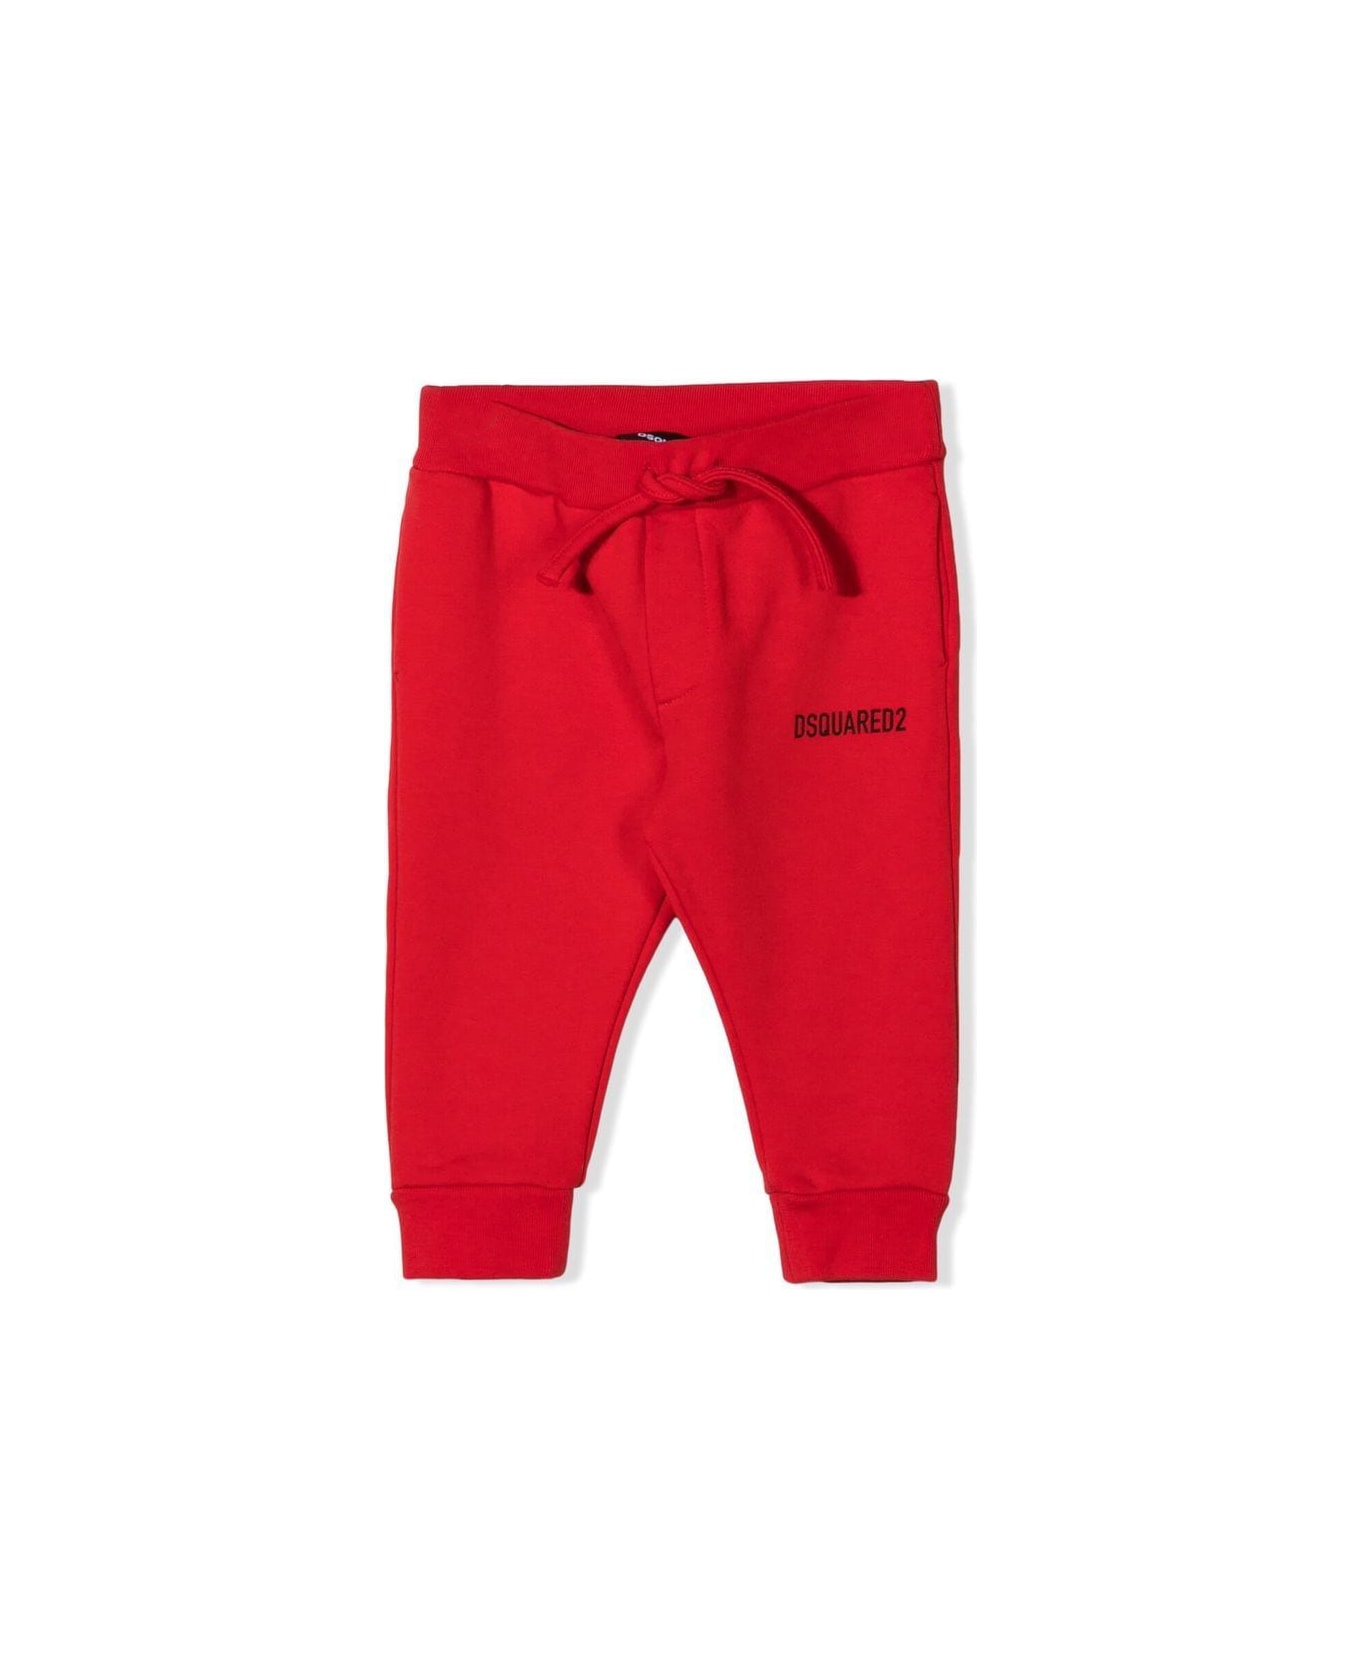 Dsquared2 NIKE Trousers With Print - Red